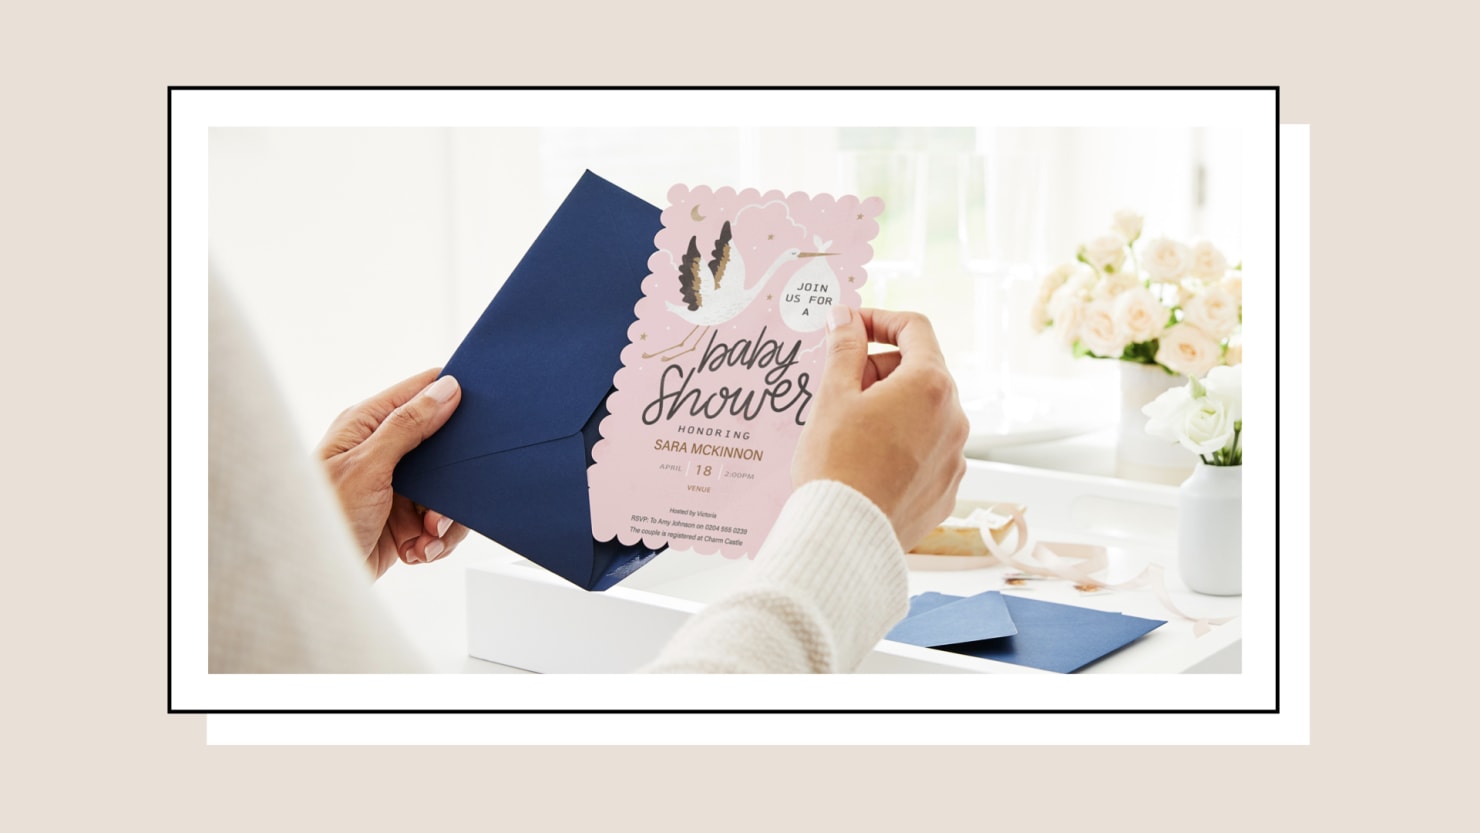 Set the Stage For Your Next Event With Up to 50% Off Invites From Vistaprint